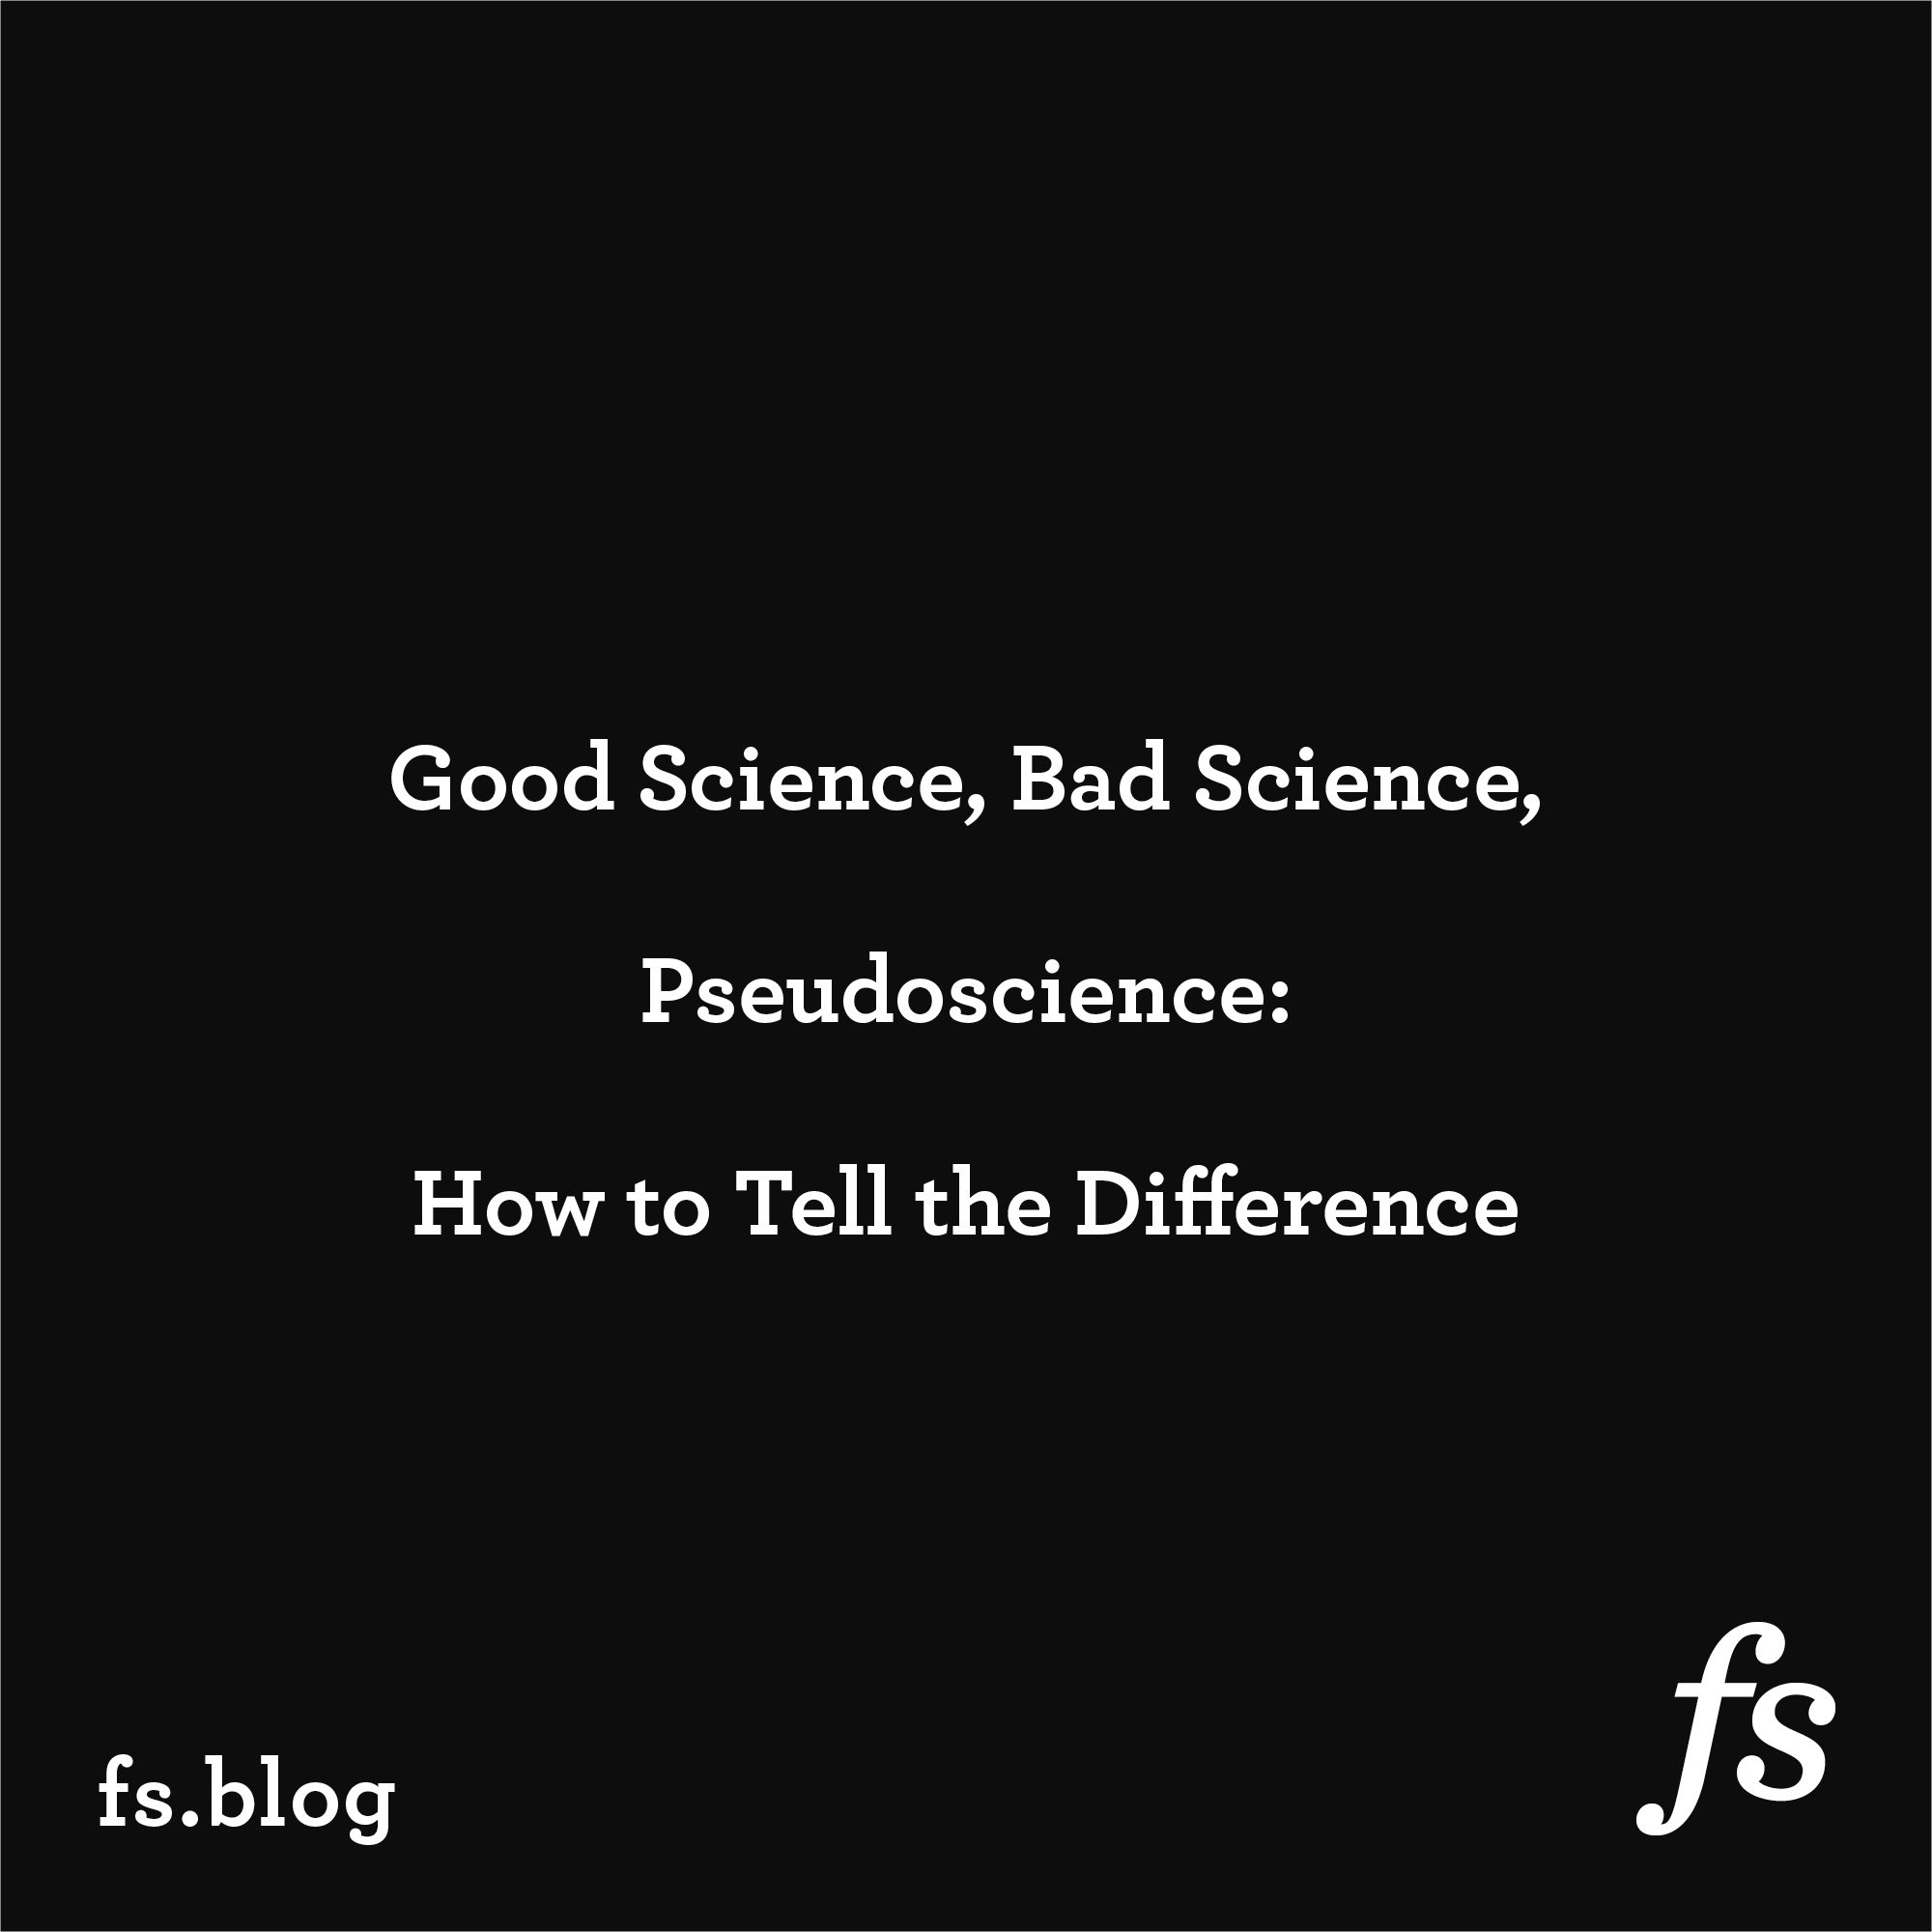 Good Science, Bad Science, Pseudoscience: How to Tell the Difference